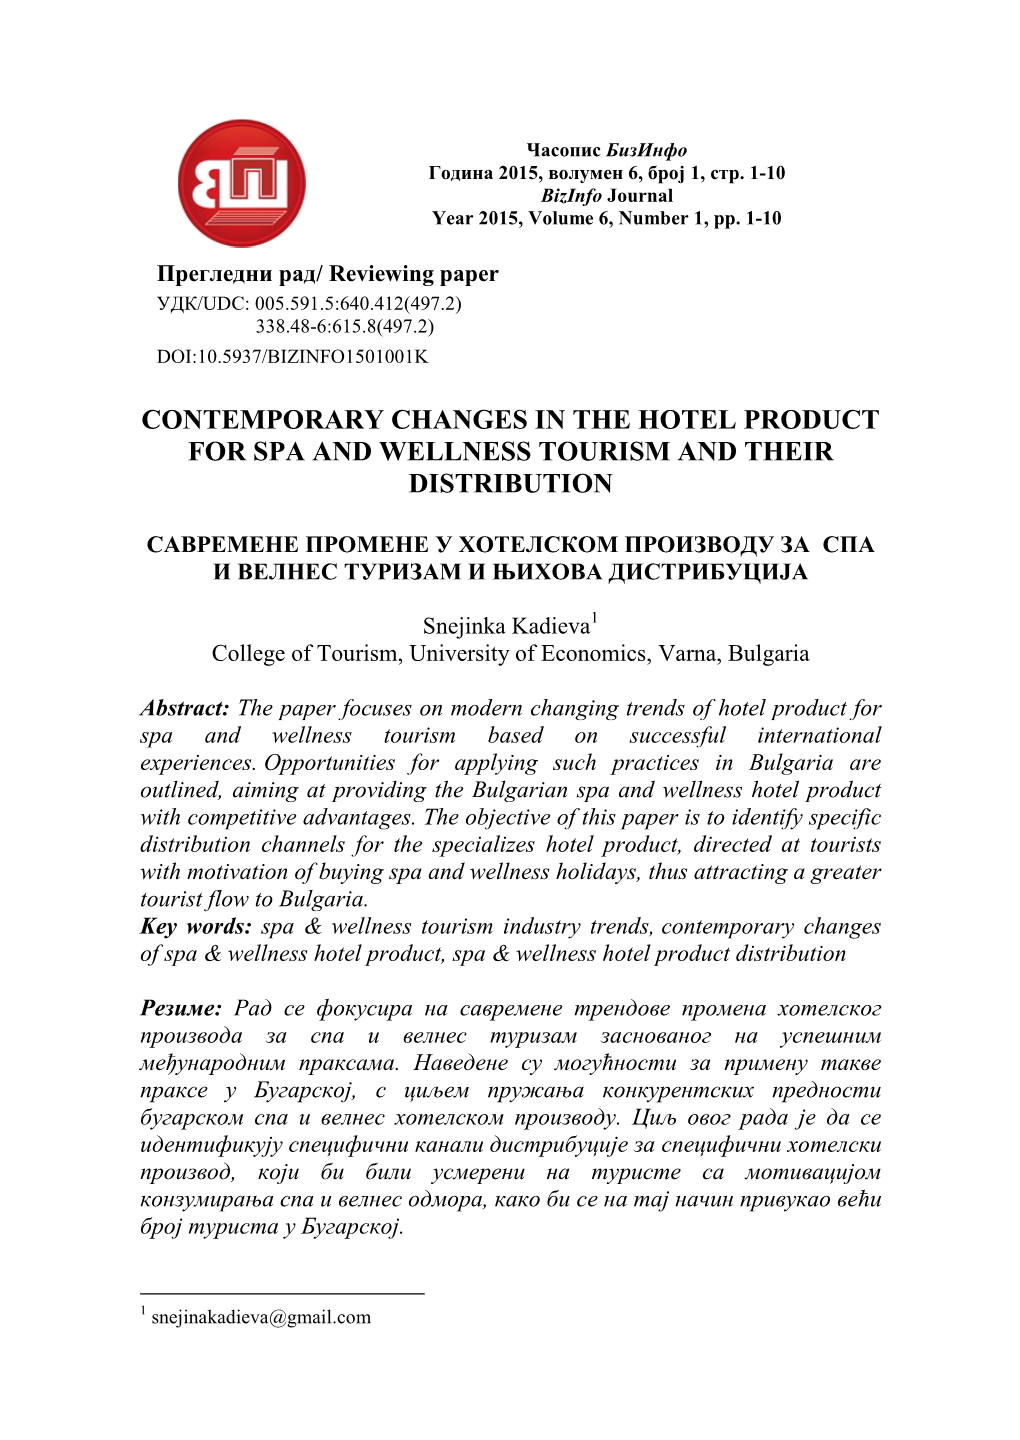 Contemporary Changes in the Hotel Product for Spa and Wellness Tourism and Their Distribution